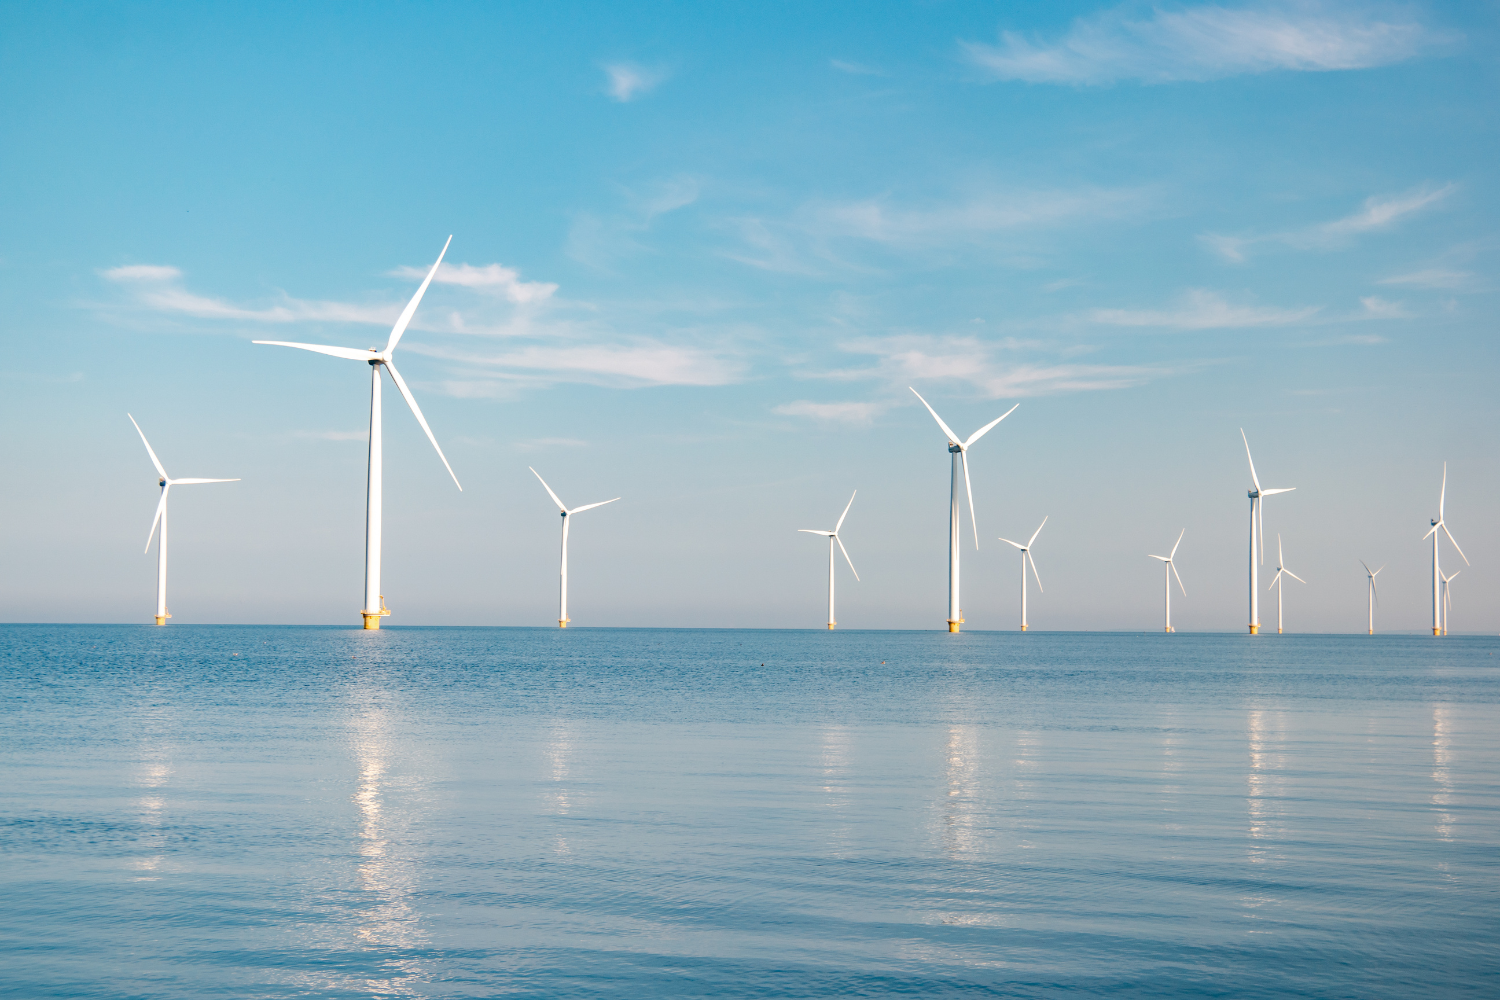 Eolus Applies for Skidbladner Offshore Wind Farm to Generate 11.7 TWh Annually